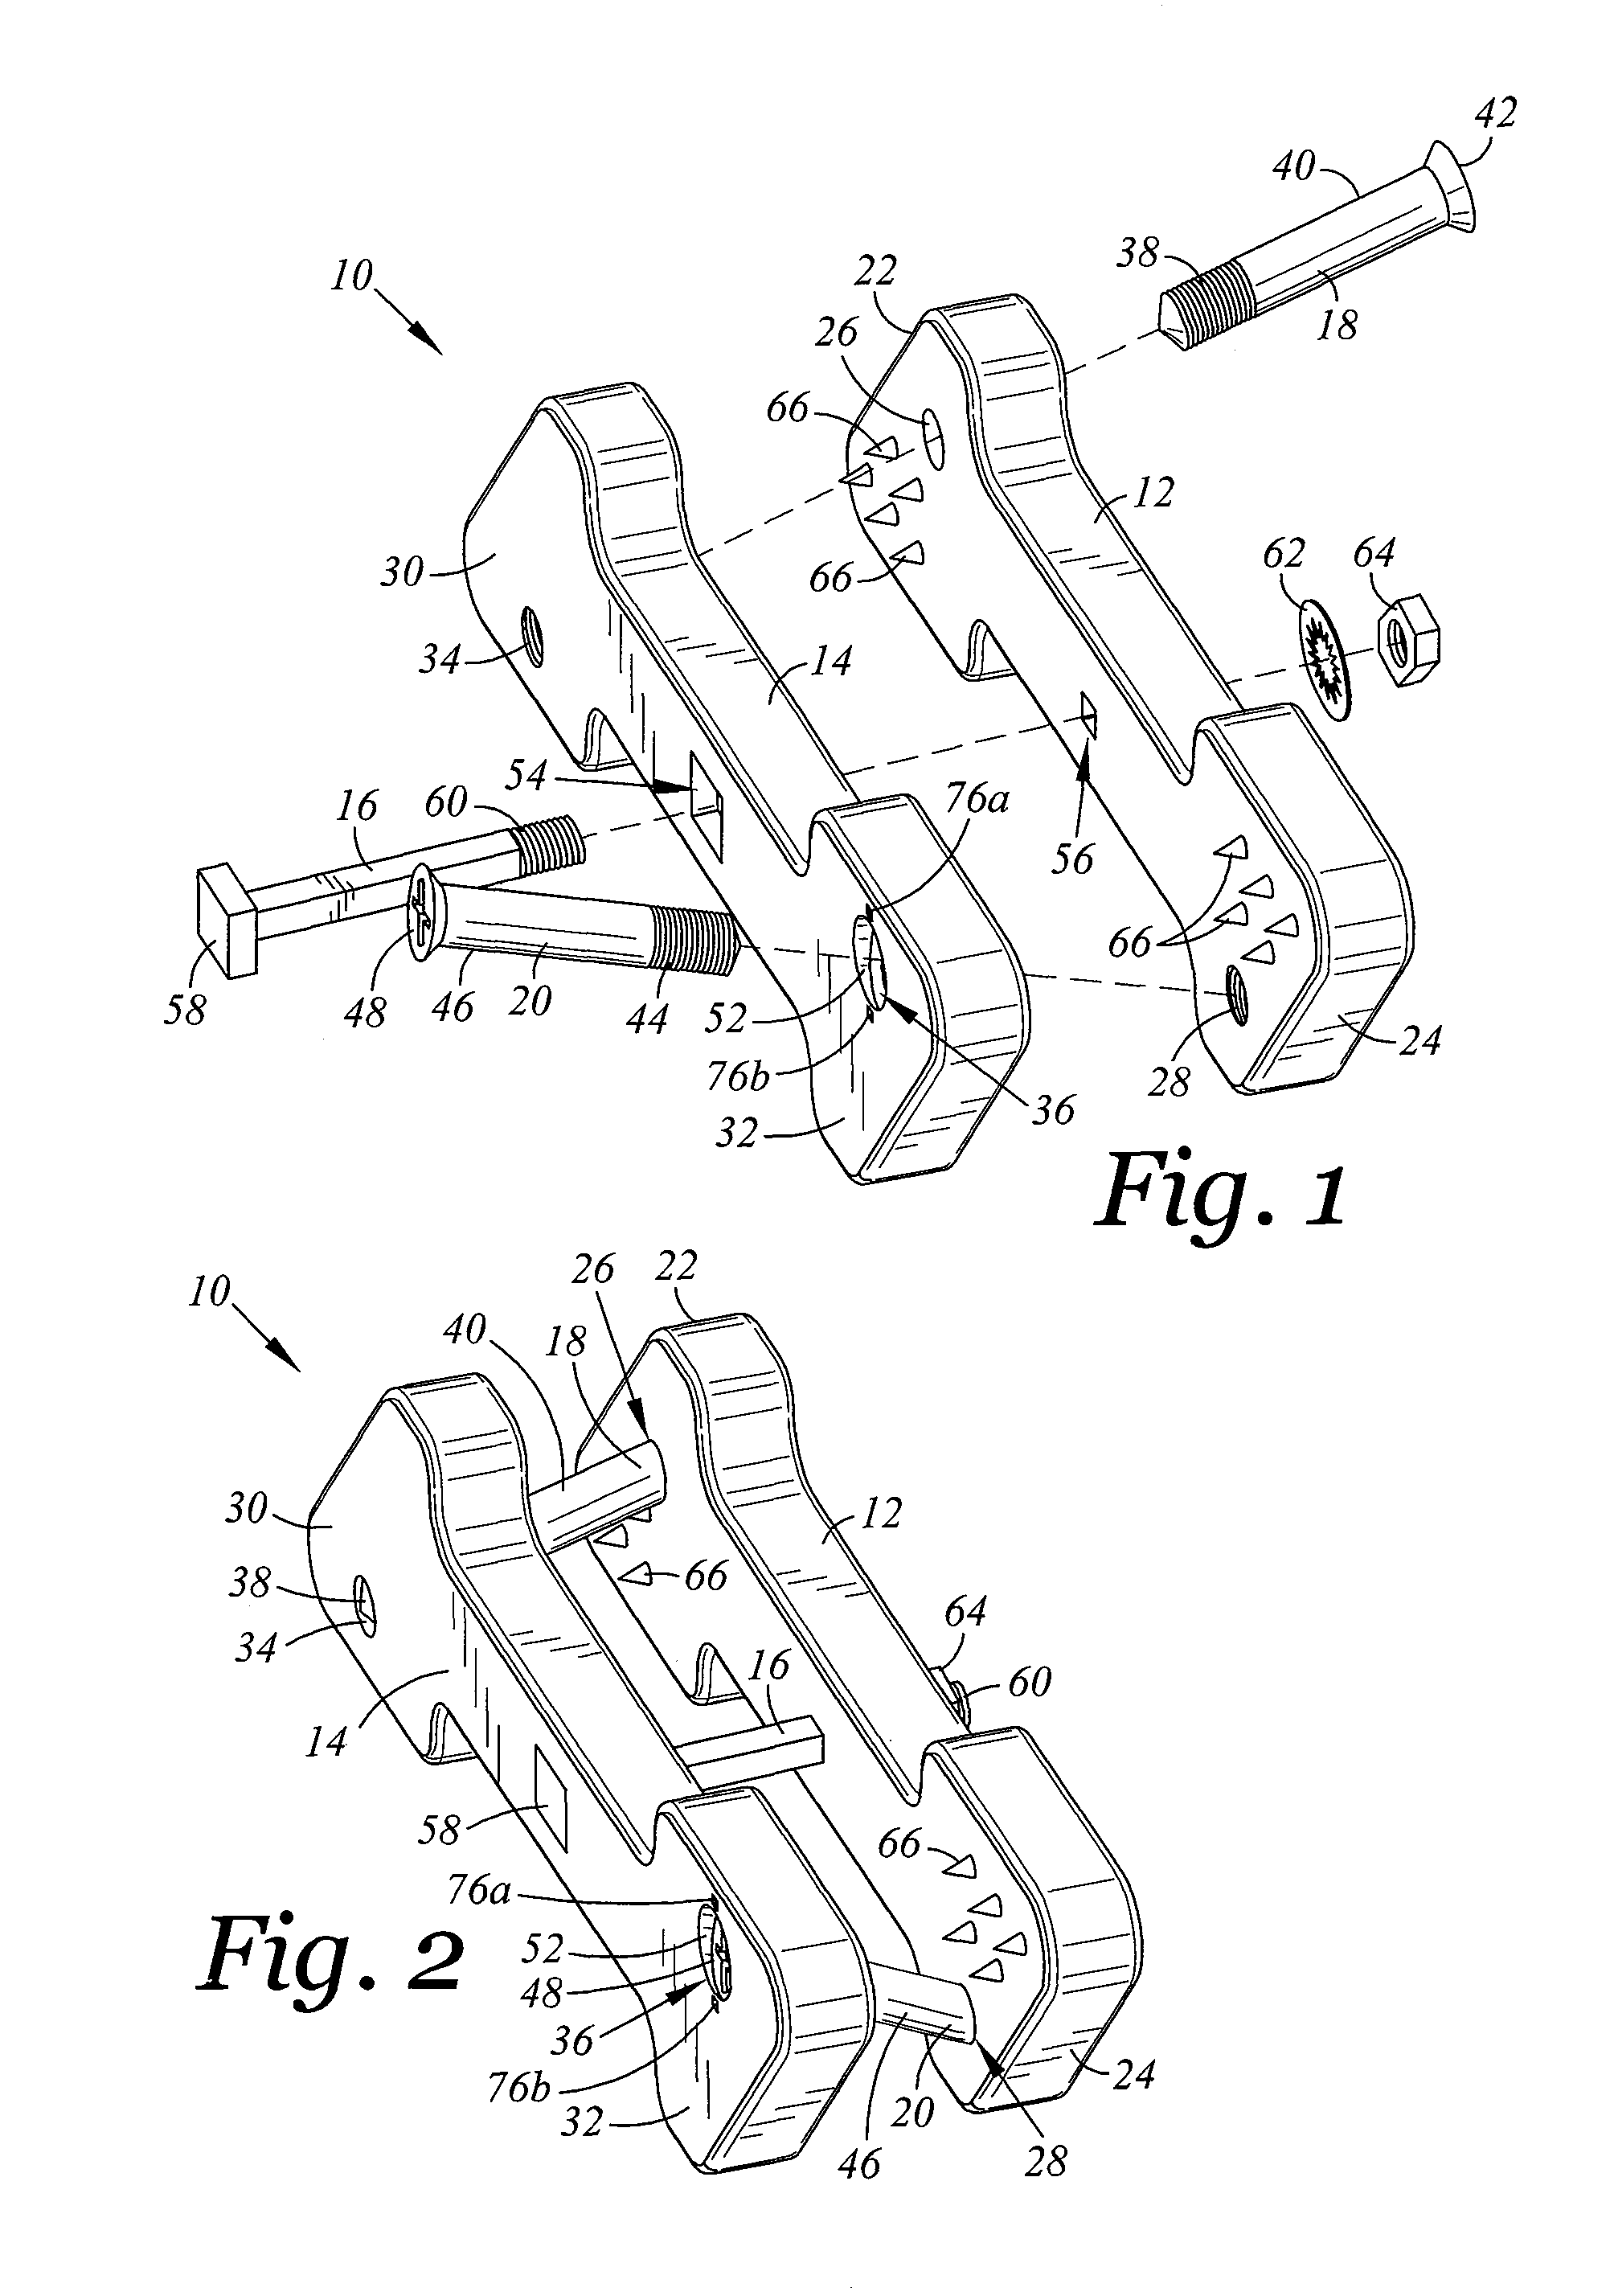 Spinal implant device with fixation plates and lag screws and method of implanting